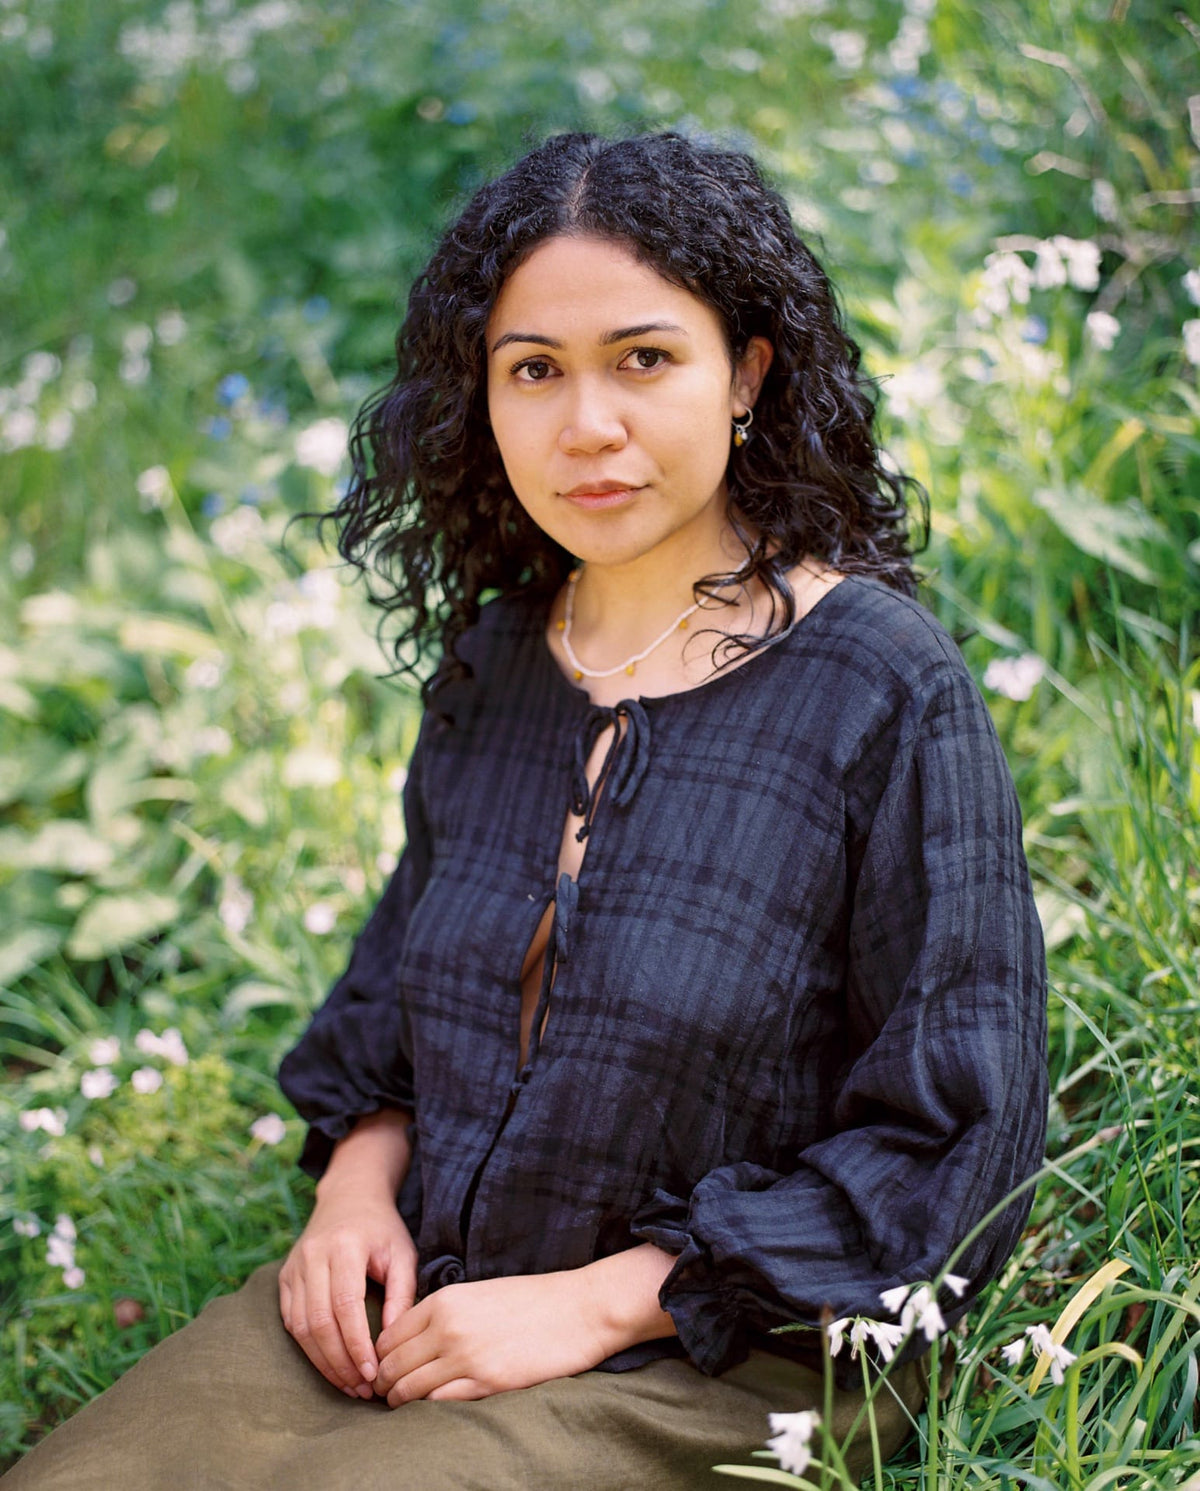 A woman in a black shirt sitting in the grass wearing the Kōwhai Seed Pearl Necklace by Avara Studio.